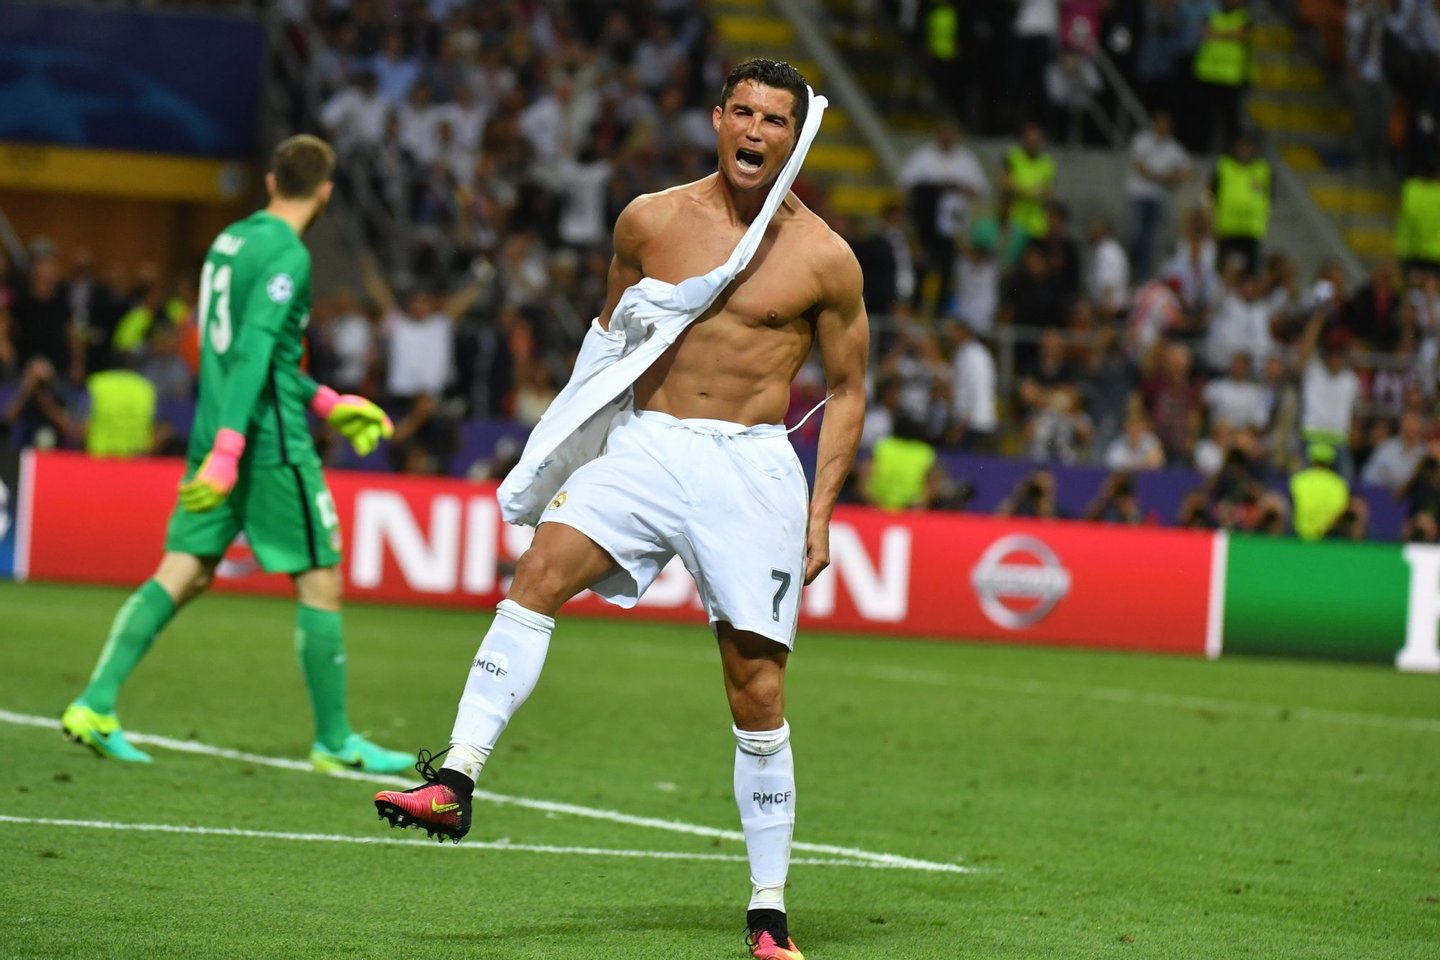 Real Madrid's Portuguese forward Cristiano Ronaldo celebrates after Real Madrid won the UEFA Champions League final football match over Atletico Madrid at San Siro Stadium in Milan, on May 28, 2016. / AFP / GERARD JULIEN        (Photo credit should read GERARD JULIEN/AFP/Getty Images)